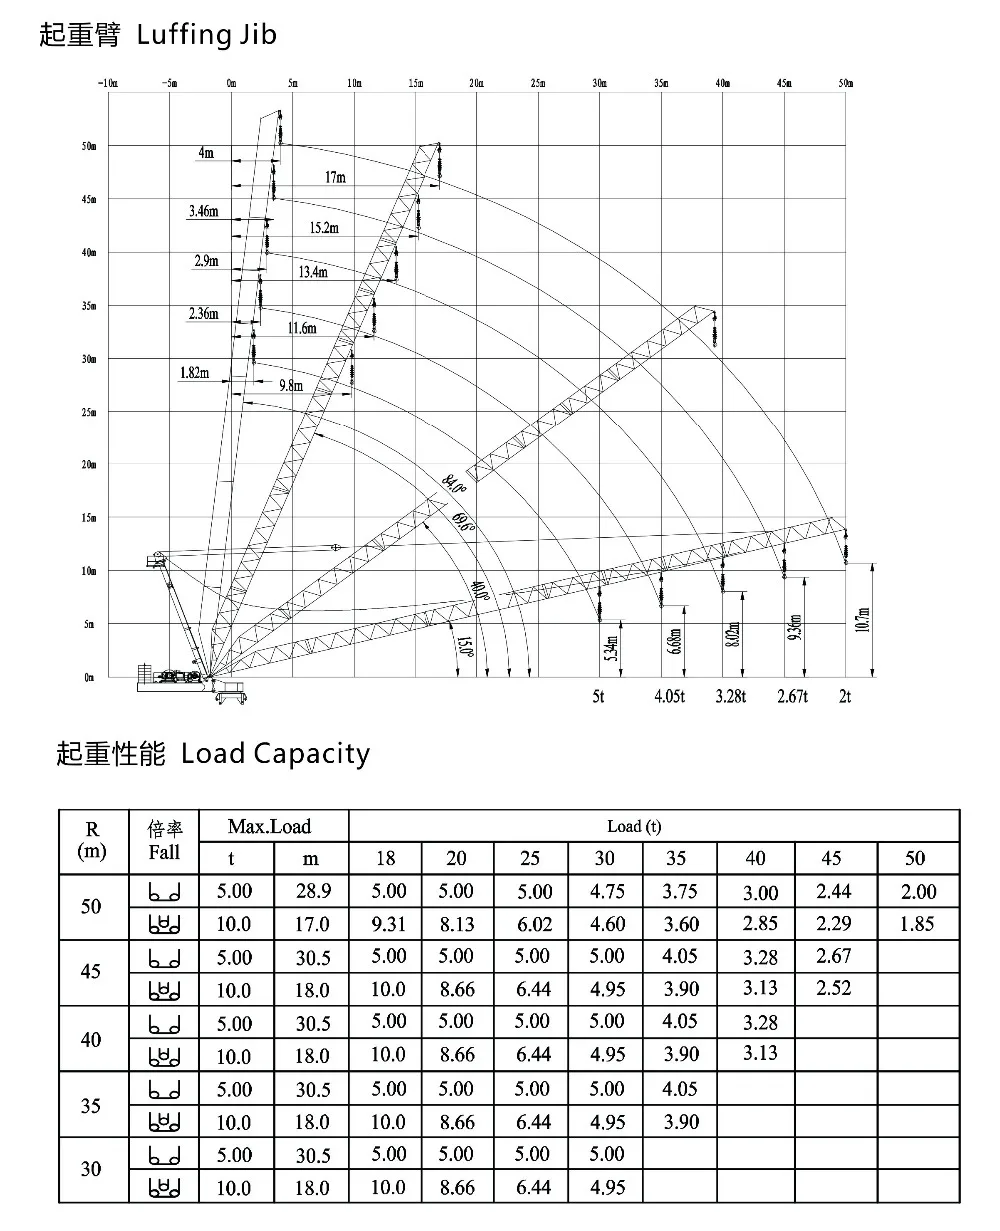 D5020 Luffing tower crane, 10t max load, 50m jib, 2.0t tip load china luffing crane